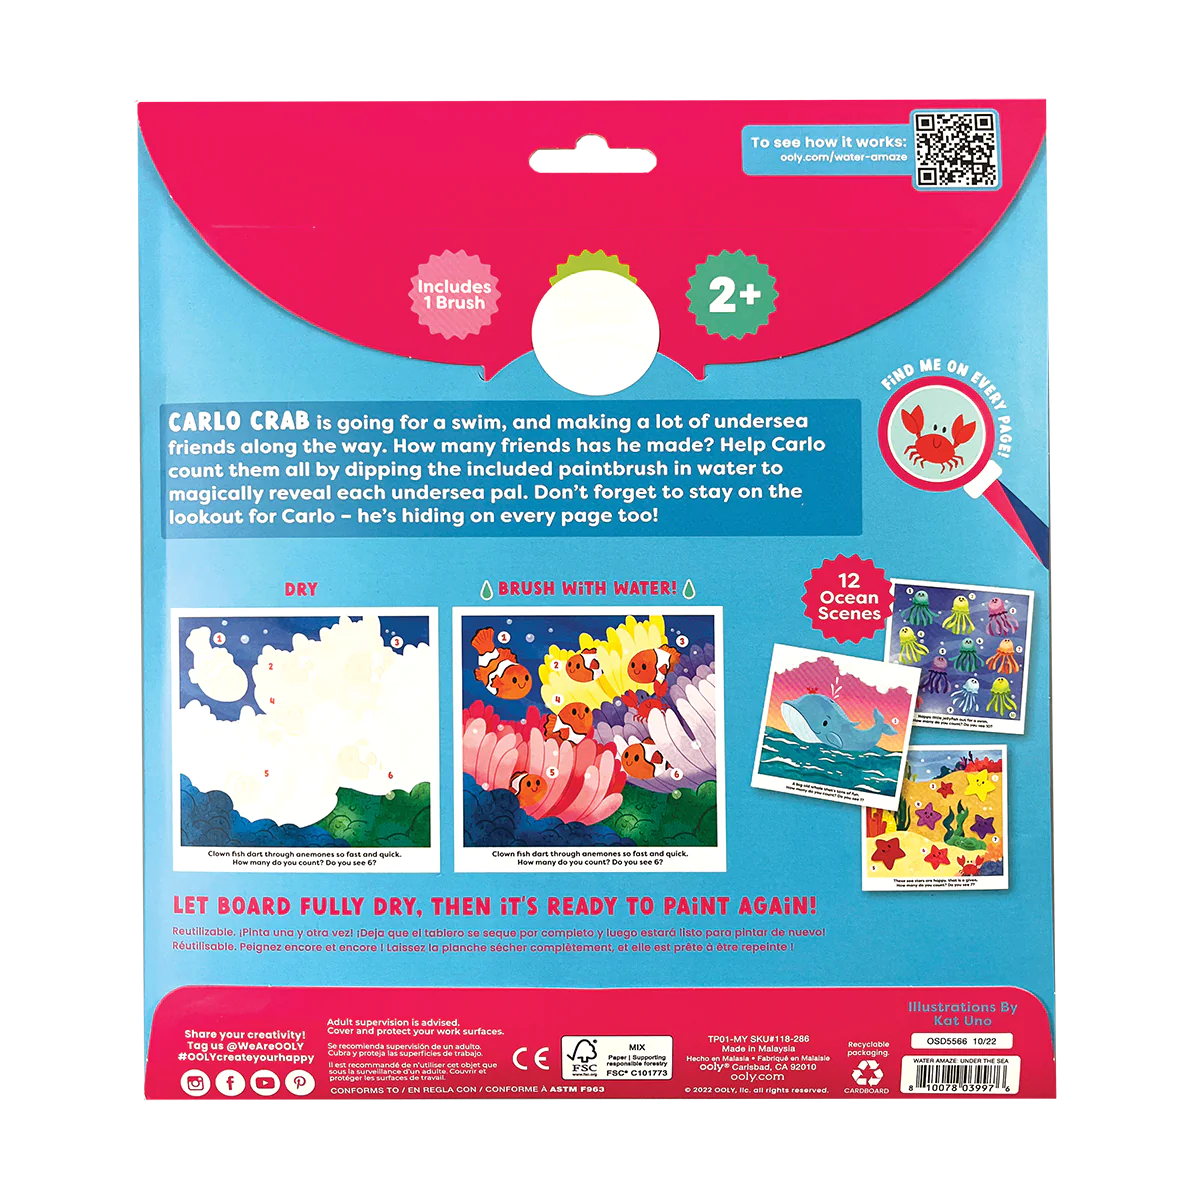 OOLY: WATER AMAZE WATER REVEAL BOARDS - UNDER THE SEA (13 PC SET)